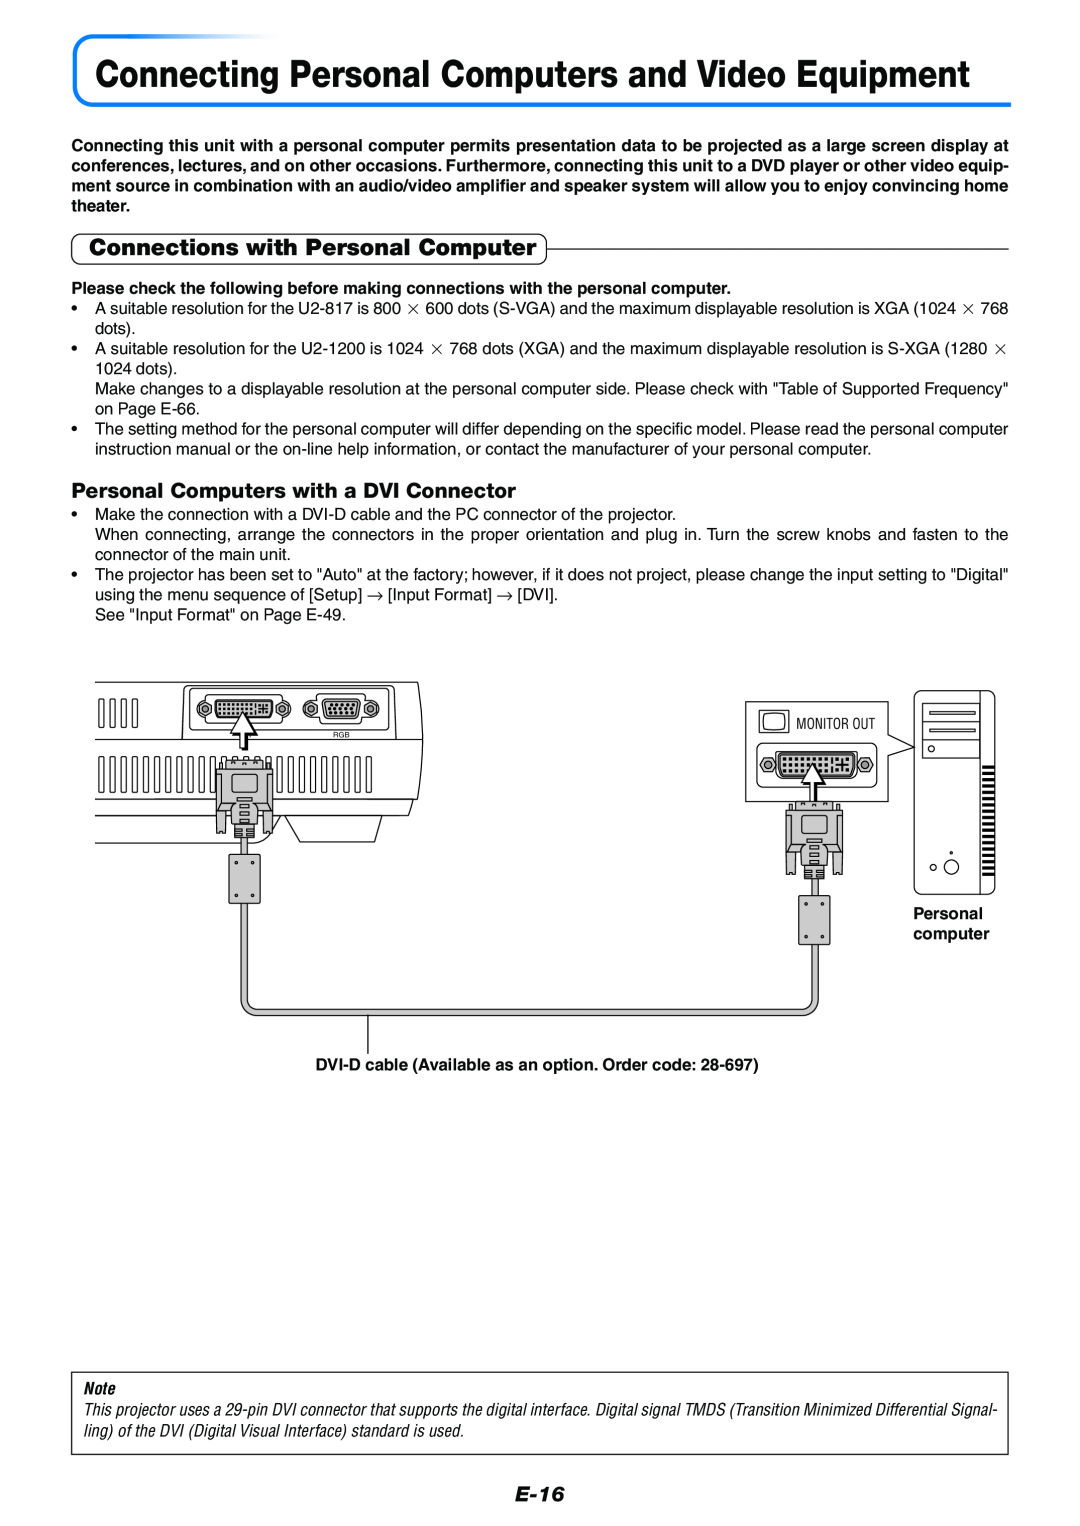 PLUS Vision Data Projector user manual Connections with Personal Computer, Personal Computers with a DVI Connector, E-16 